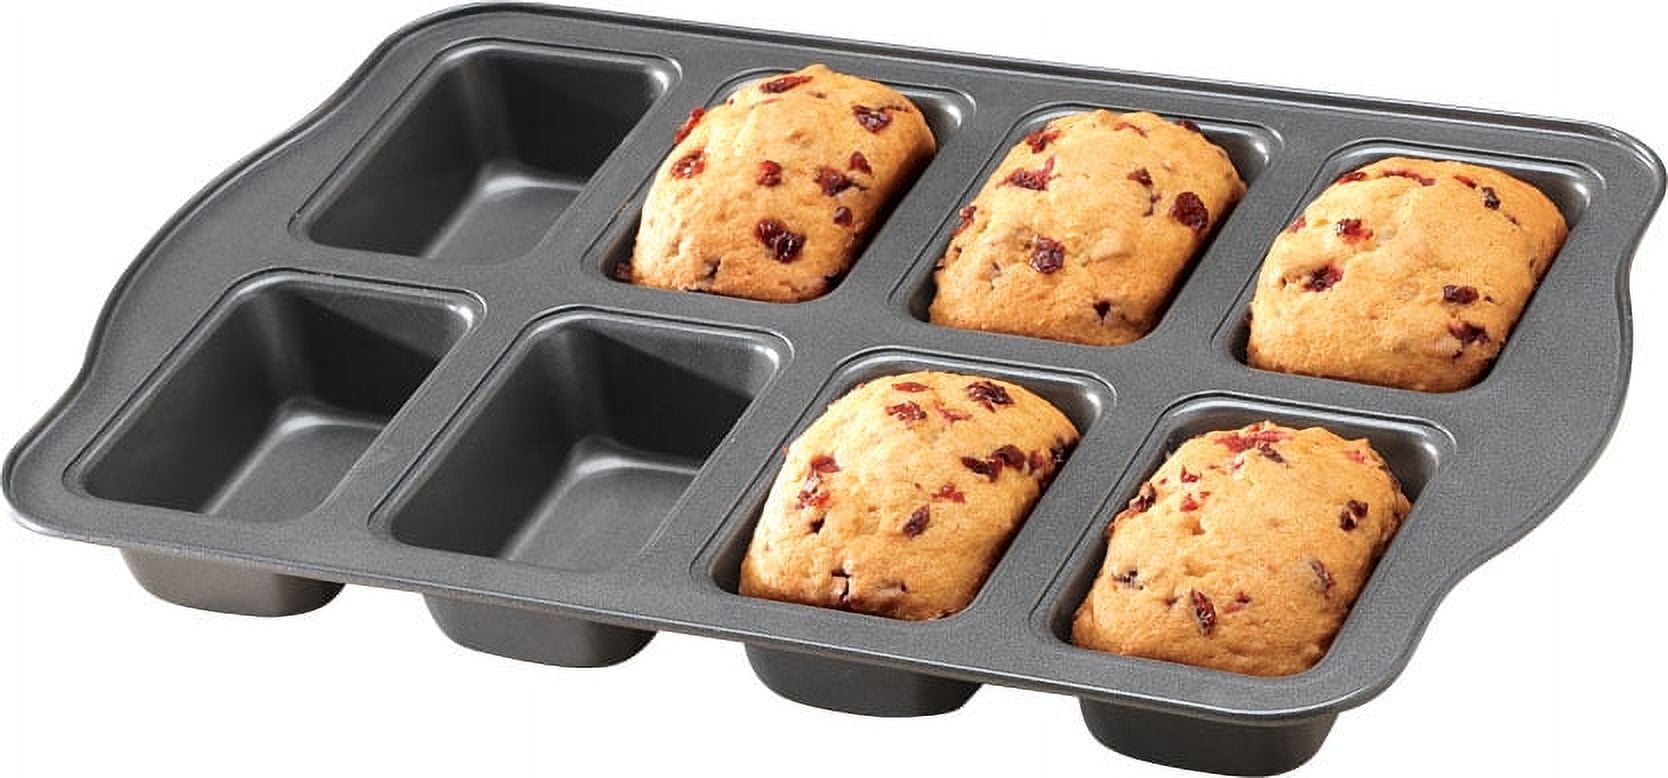  Wilton Perfect Results Non-Stick Mini Loaf Pan, 8-Cavity, 15.2  IN x 9.5 IN x 1.6, Gray: Home & Kitchen